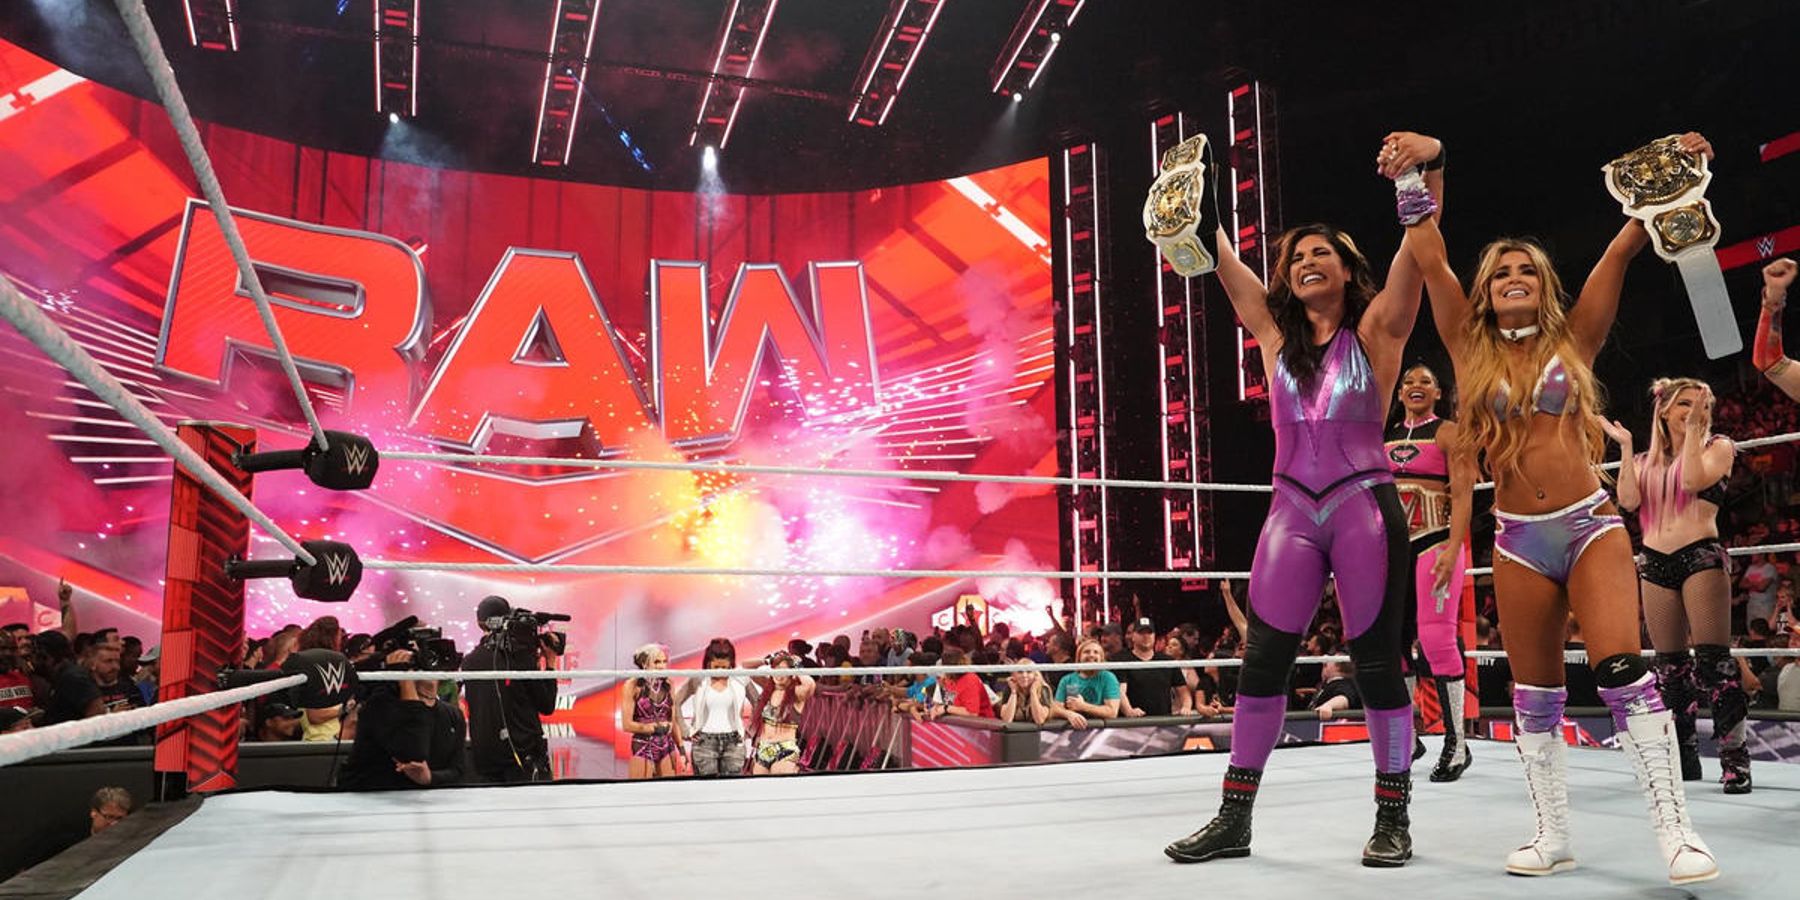 Raquel Rodriguez and Aliyah celebrate winning the WWE Women's Tag-Team Championship in 2022.